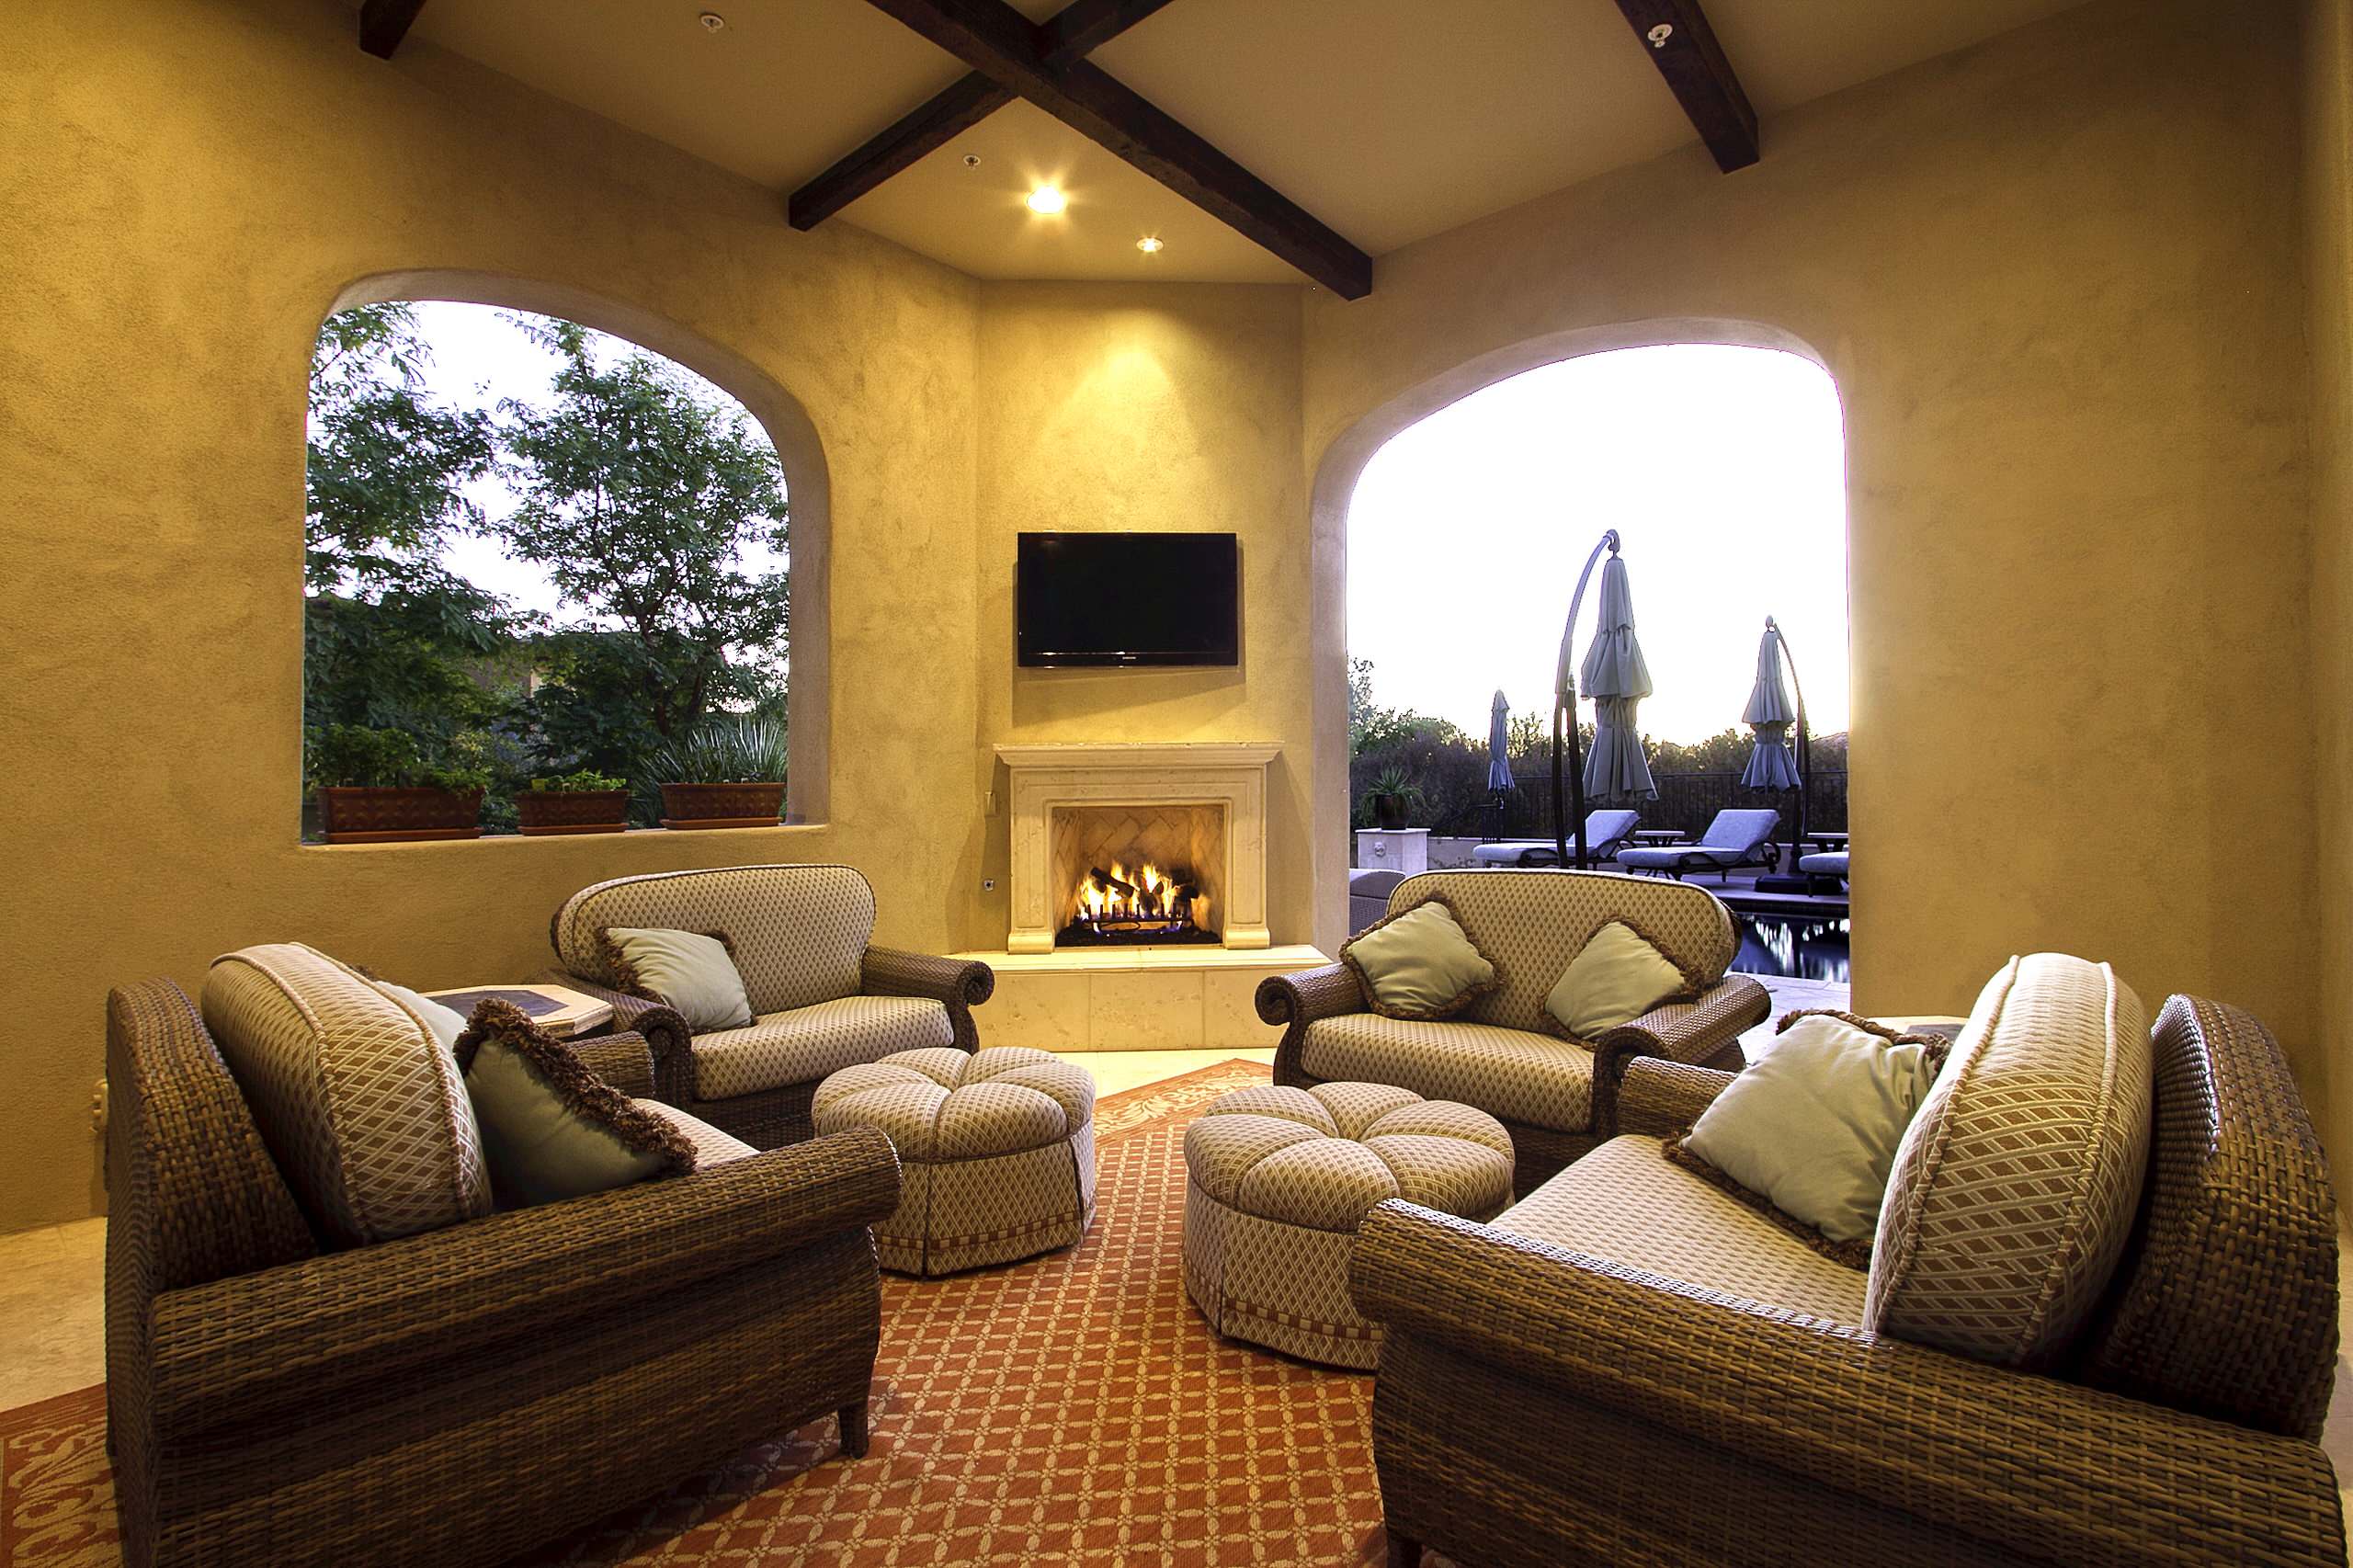 * 2011 THIRD PLACE - ASID - RESIDENTIAL * Scottsdale Elegance